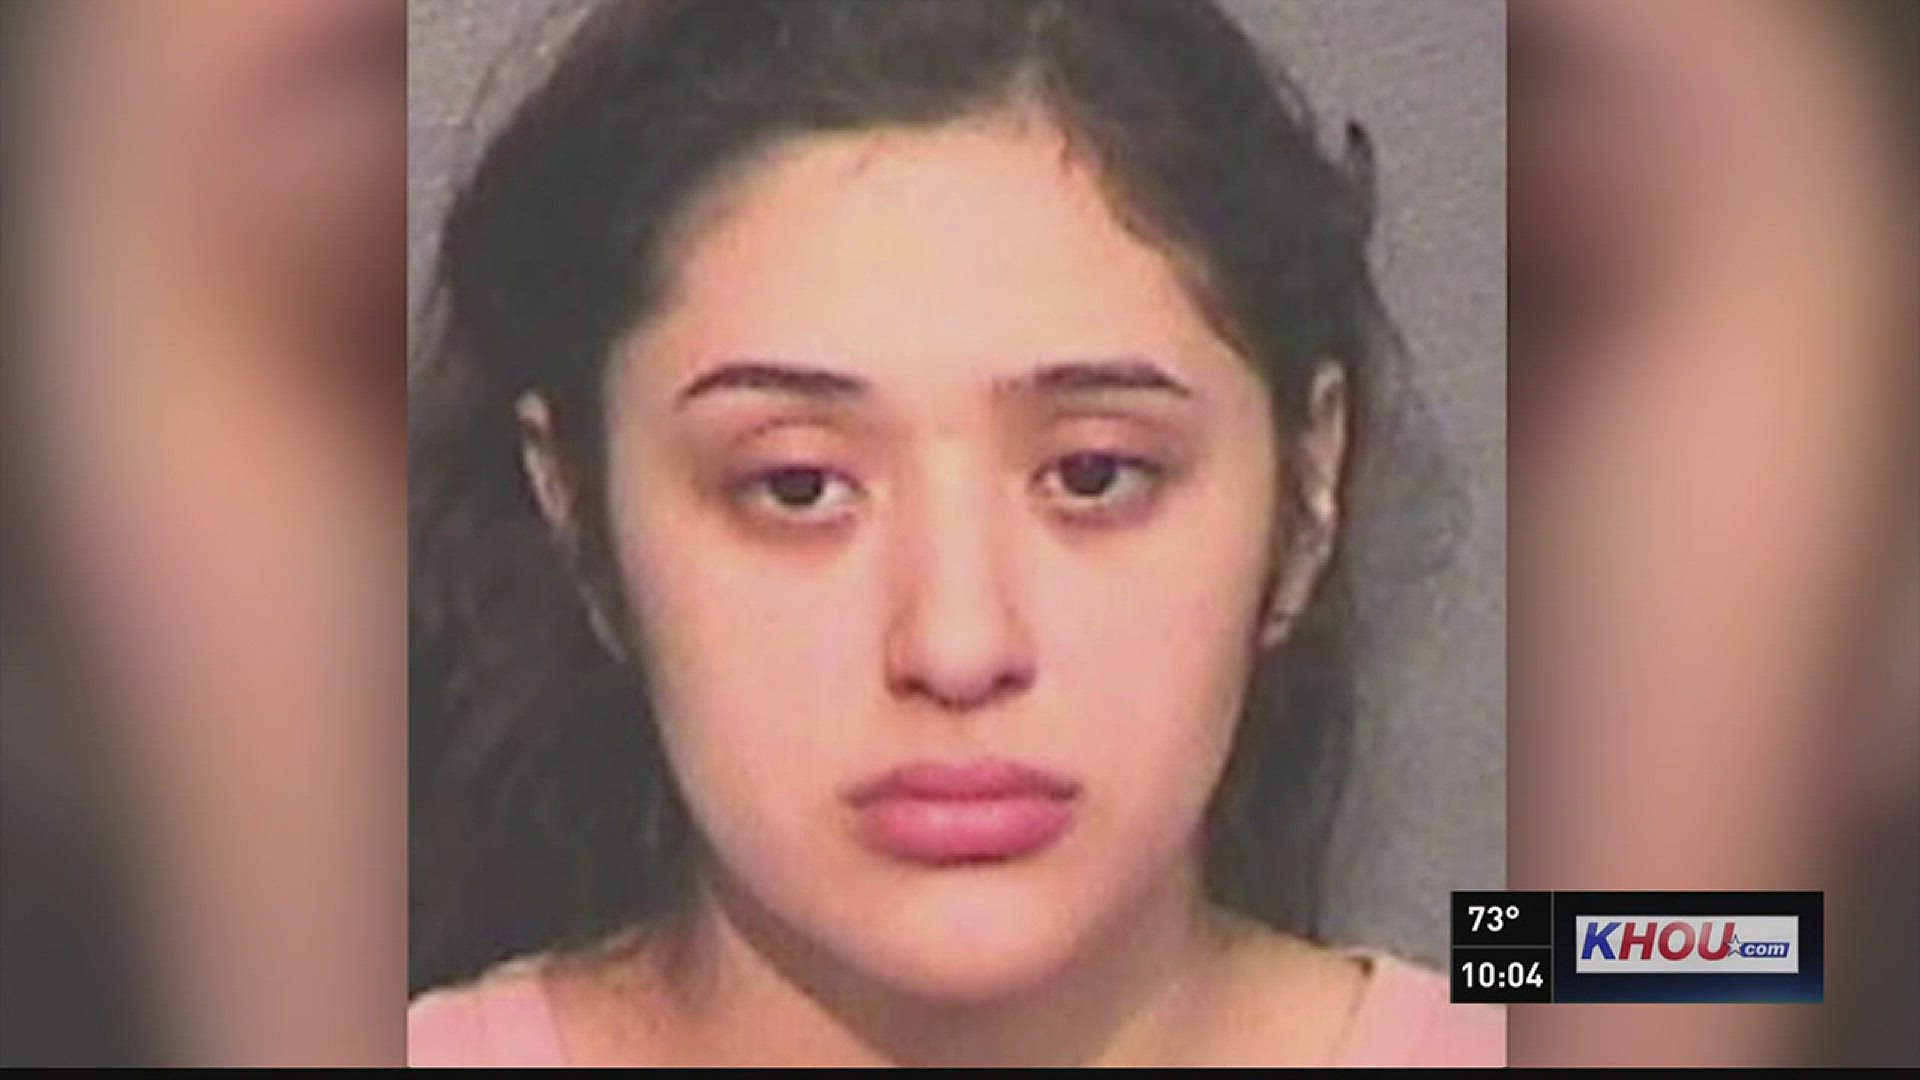 Police say a woman suspected of drunk driving when she crashed into a car, killing a mother and her infant, was arrested Wednesday.